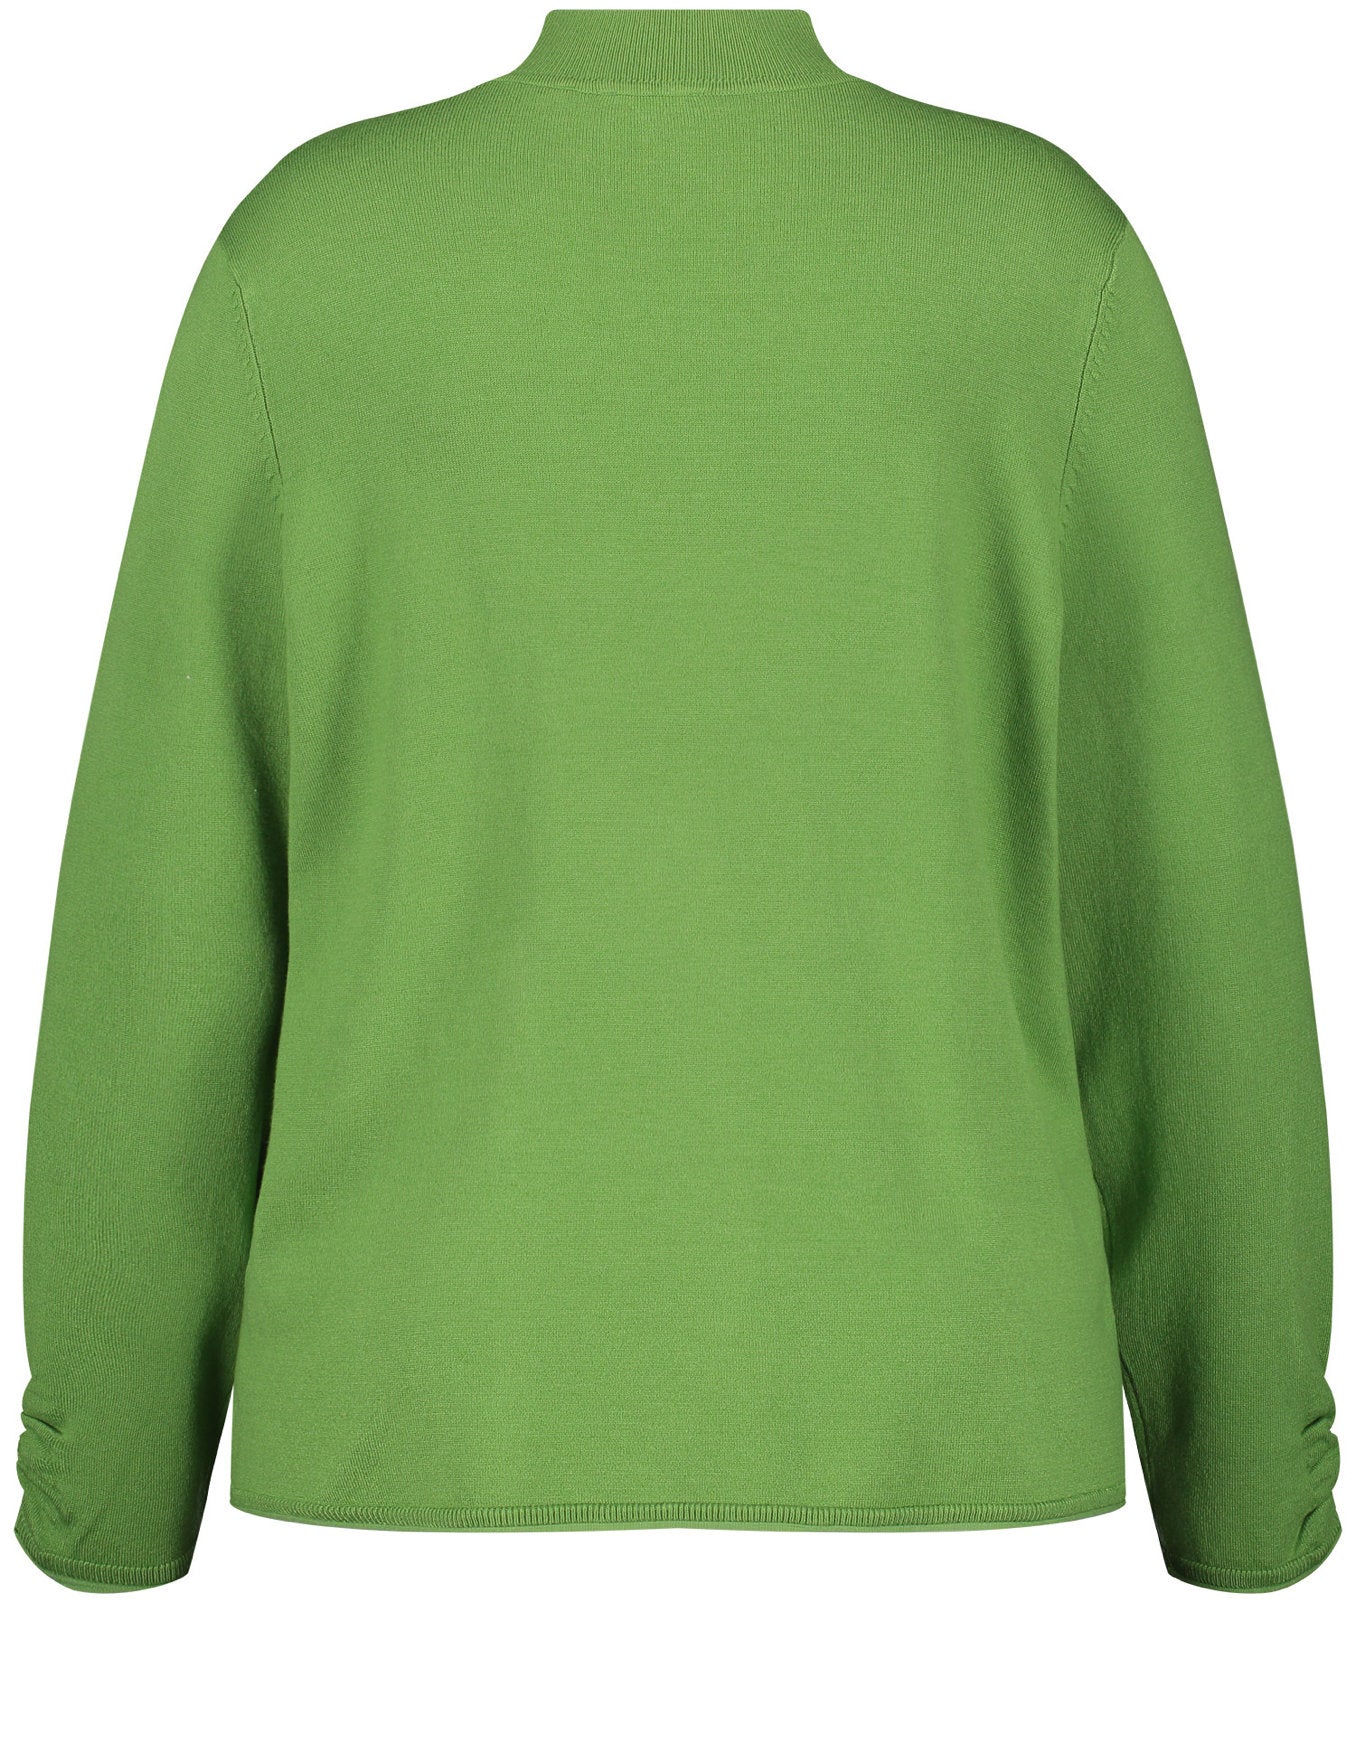 Fine Knit Jumper With Gathers On The Sleeves_372217-25400_5560_03